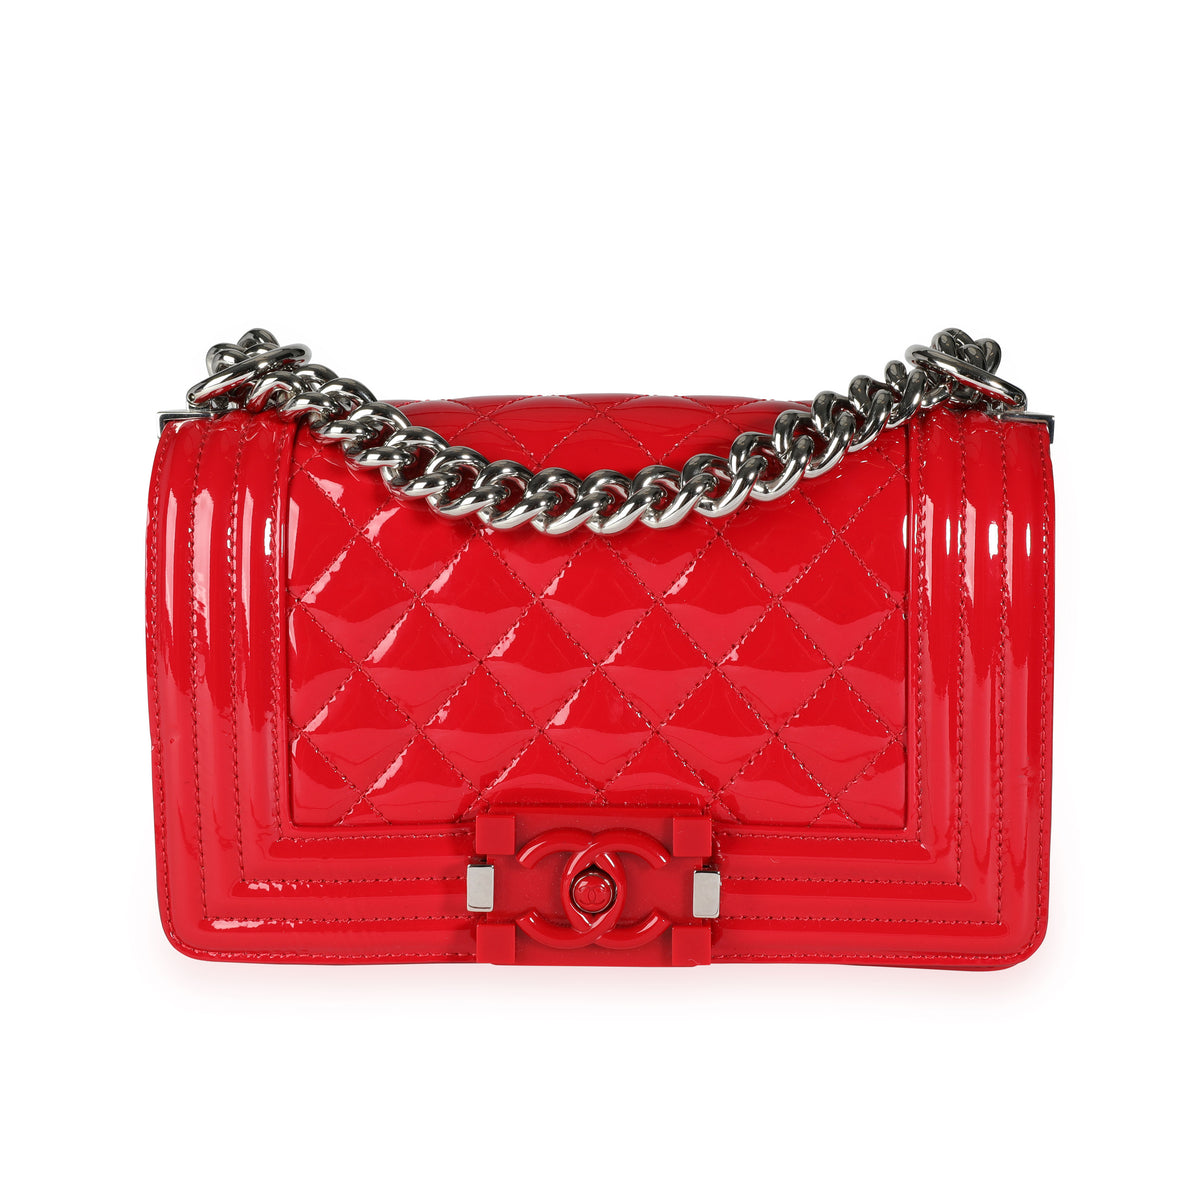 Chanel Red Quilted Patent Leather & Plexiglass Small Boy Bag